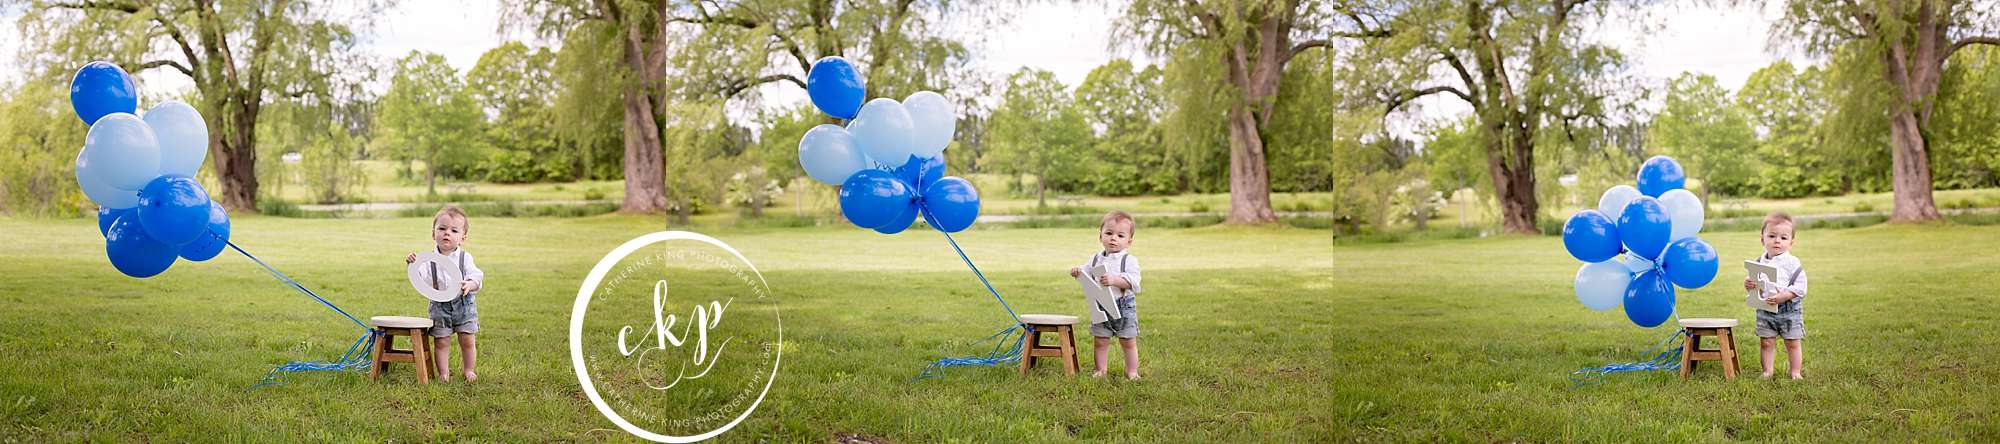 first birthday photography session 1